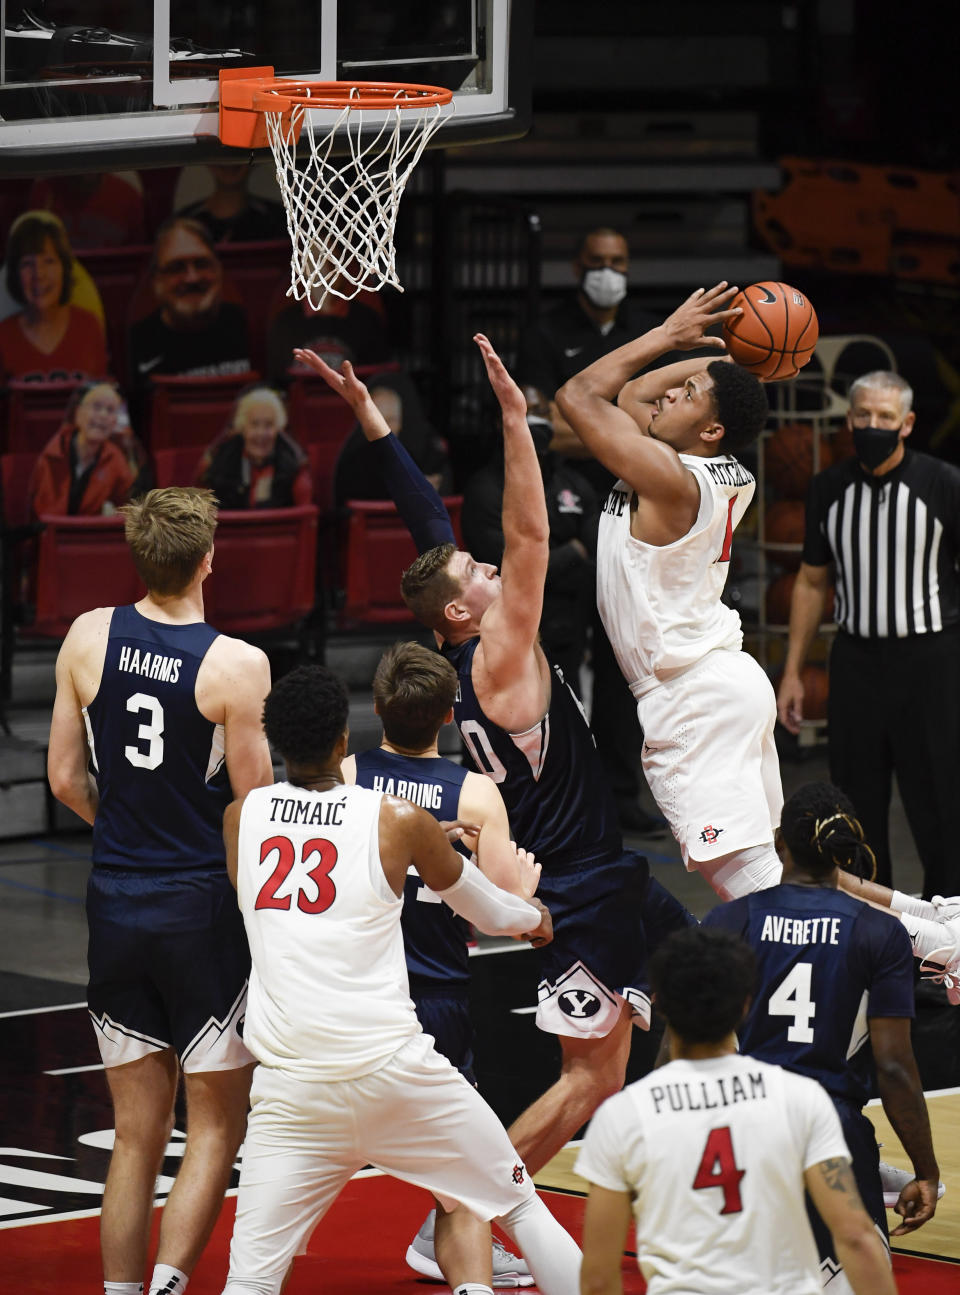 San Diego State forward Matt Mitchell (11) shoots over BYU forward Kolby Lee (40) during the second half of an NCAA college basketball game Friday, Dec. 18, 2020, in San Diego. (AP Photo/Denis Poroy)